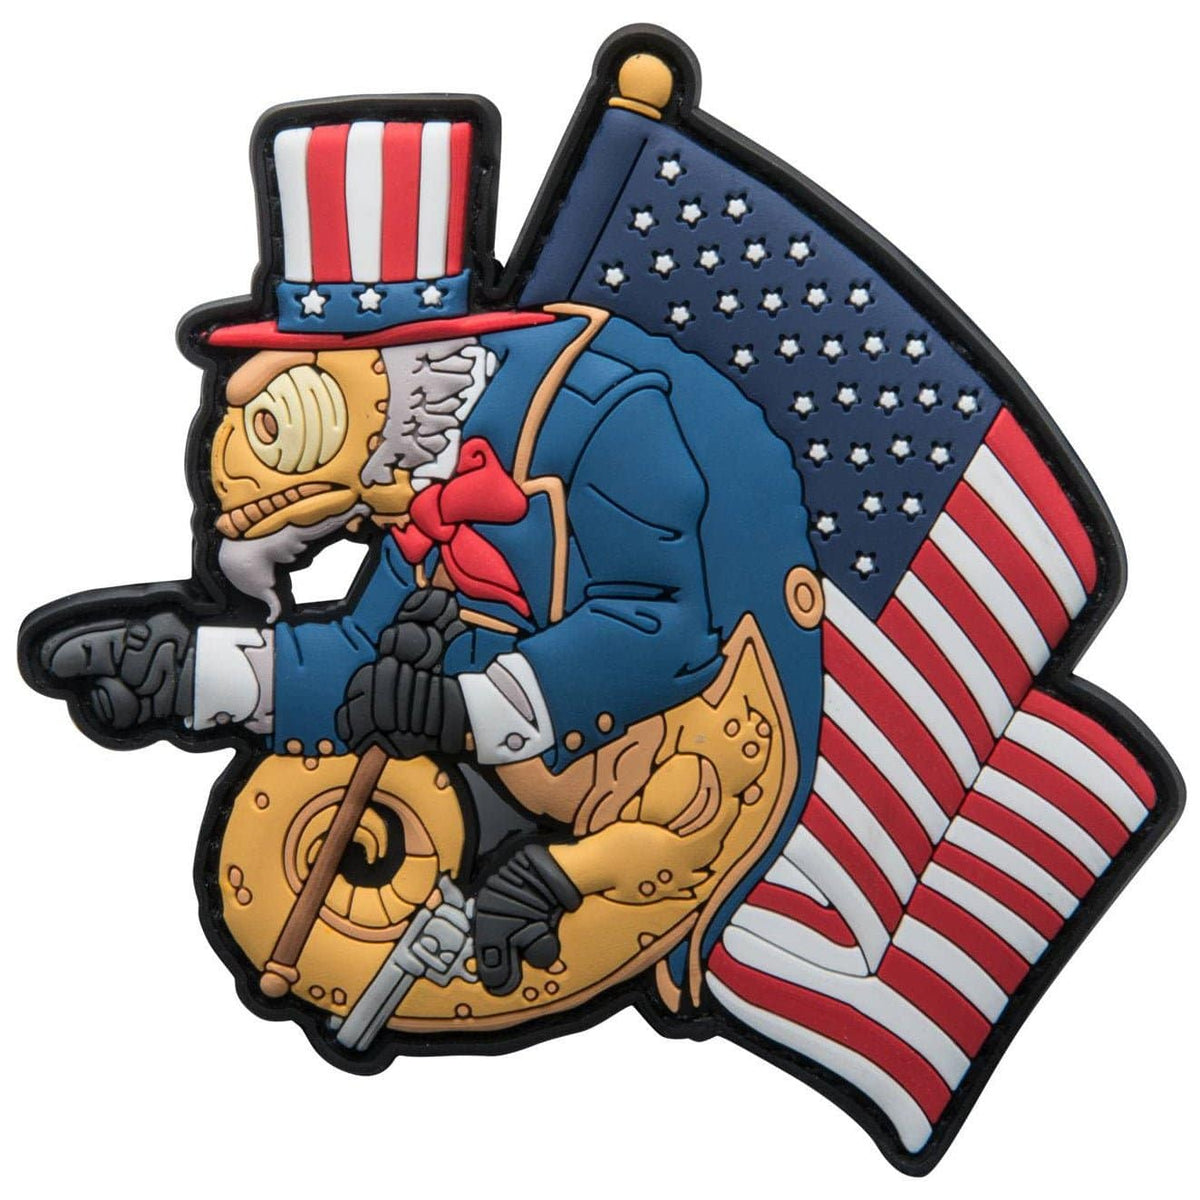 HELIKON-TEX CHAMELEON UNCLE CHAM OPERATOR PATCH - The Morale Patches